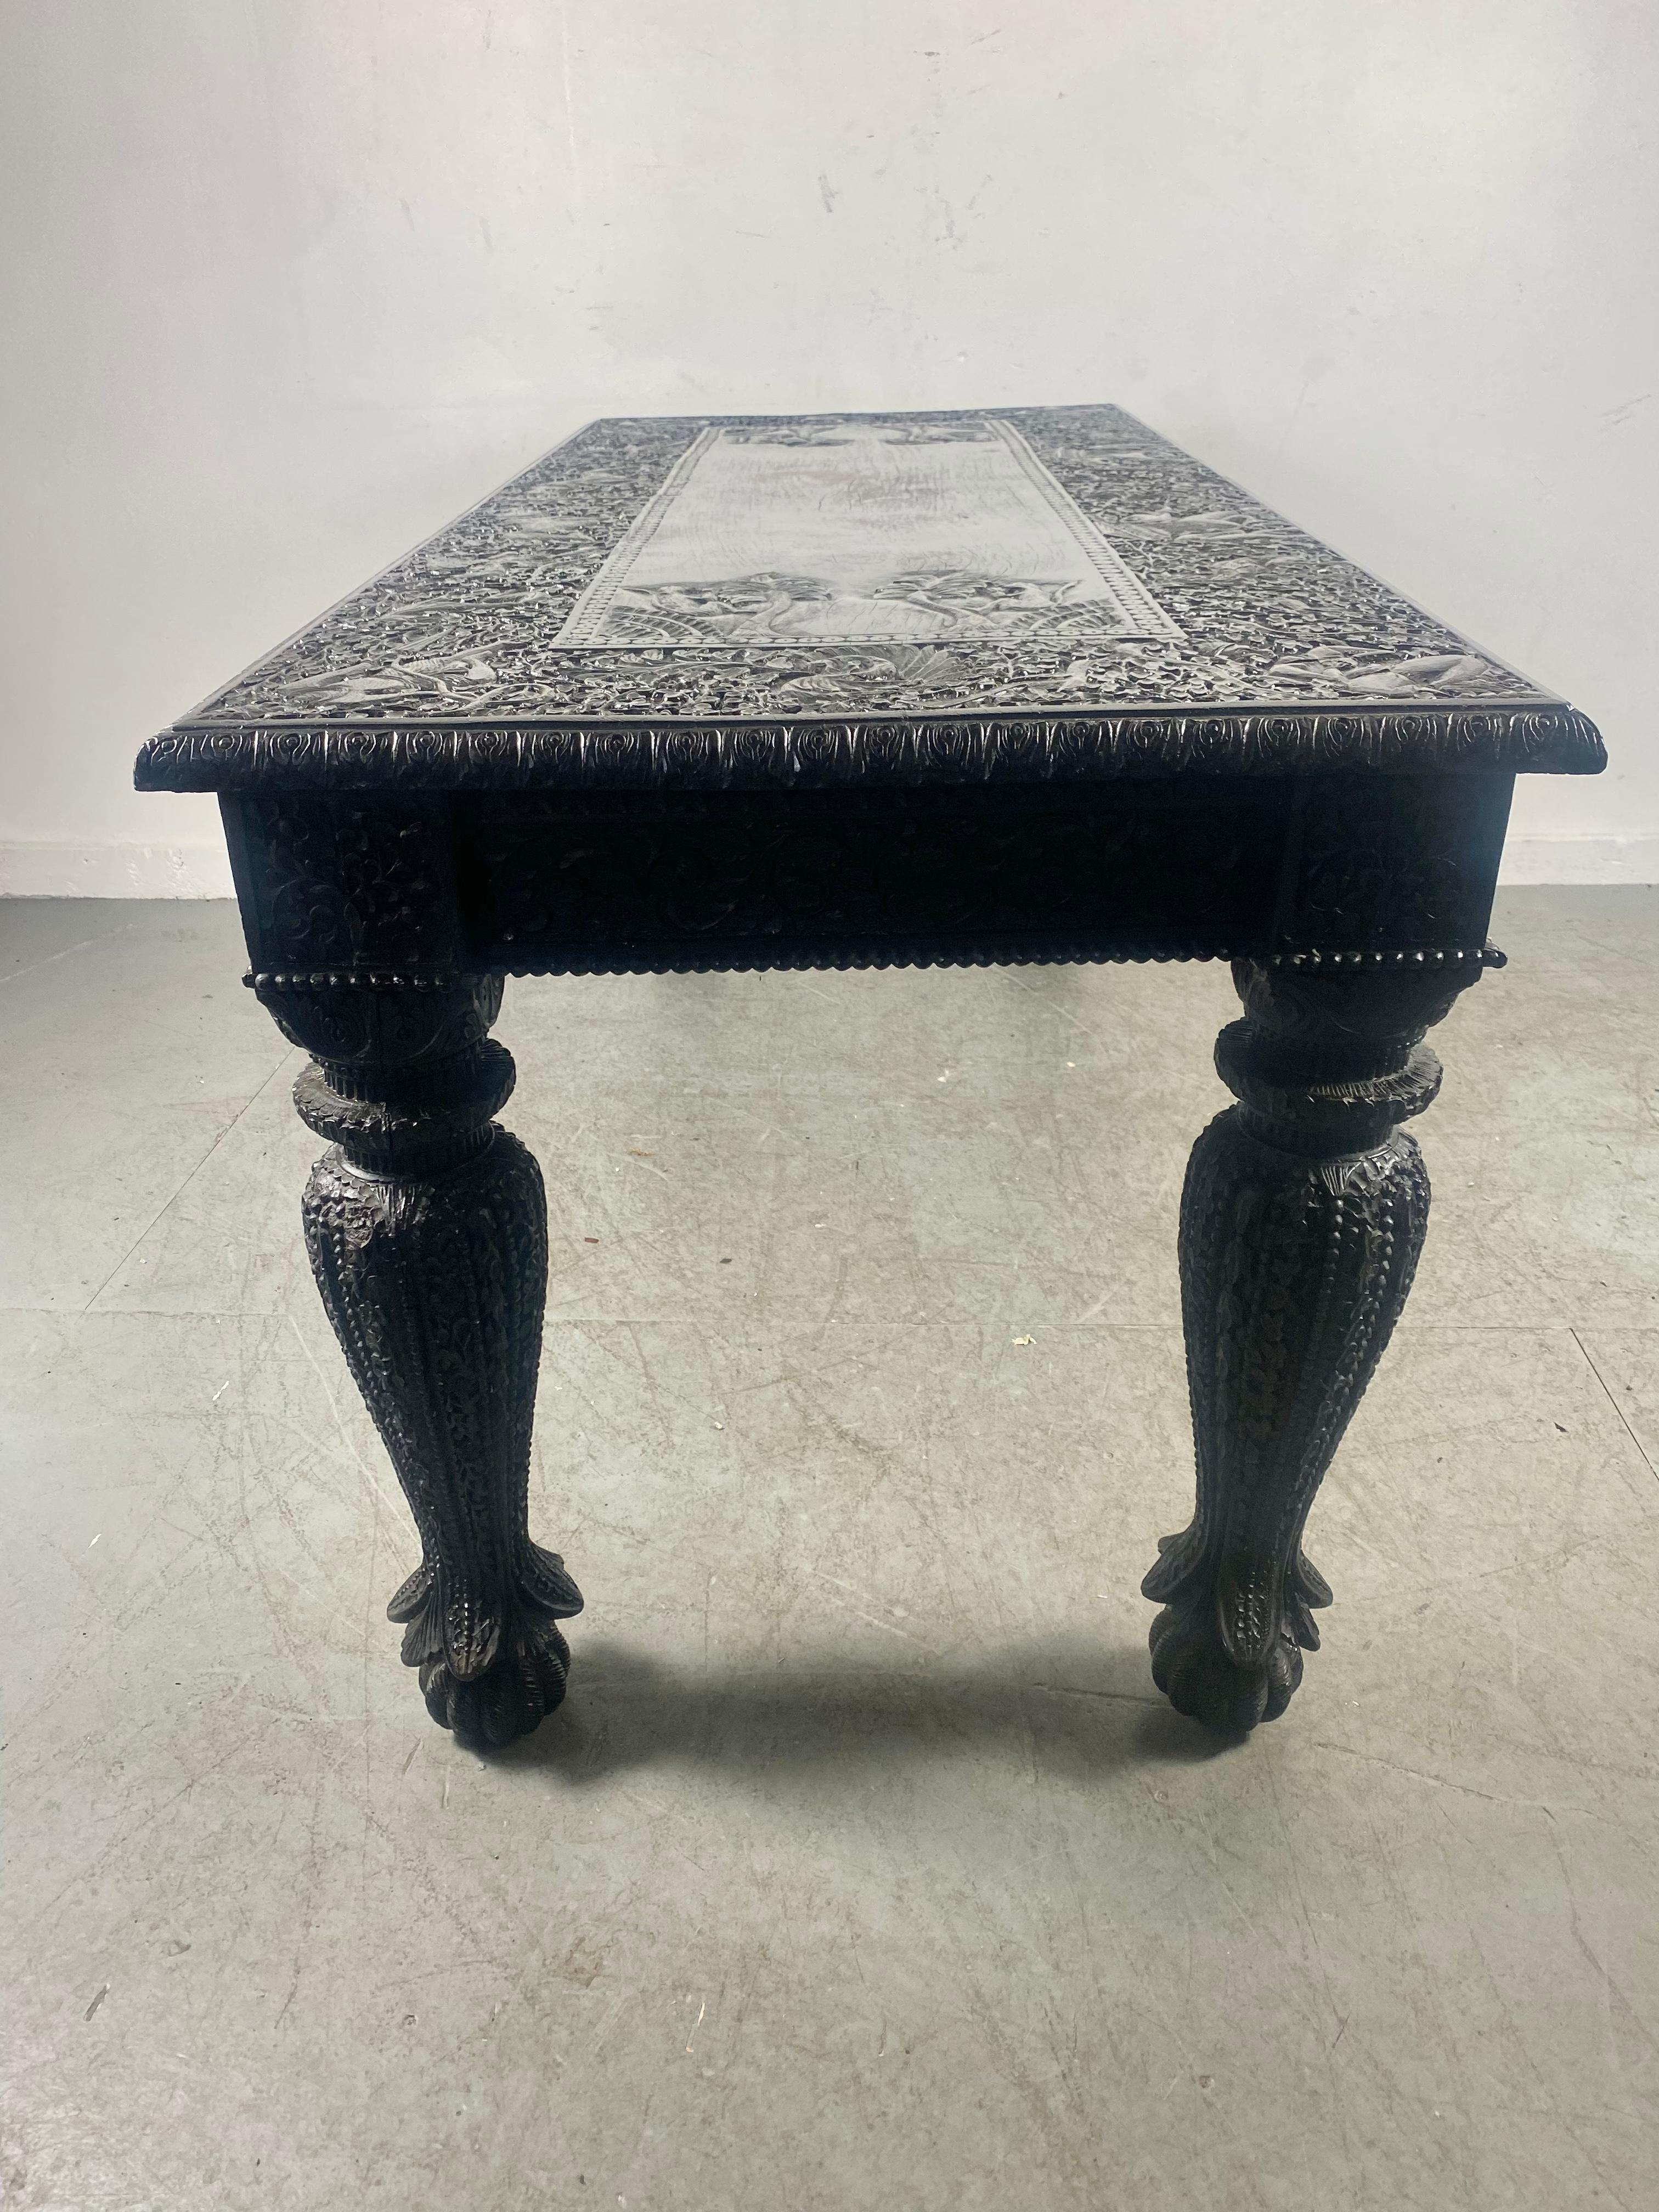 Anglo-Indian Exquisetly Carved Turn or the Century AngloIndian Table, Dining / Desk / Library